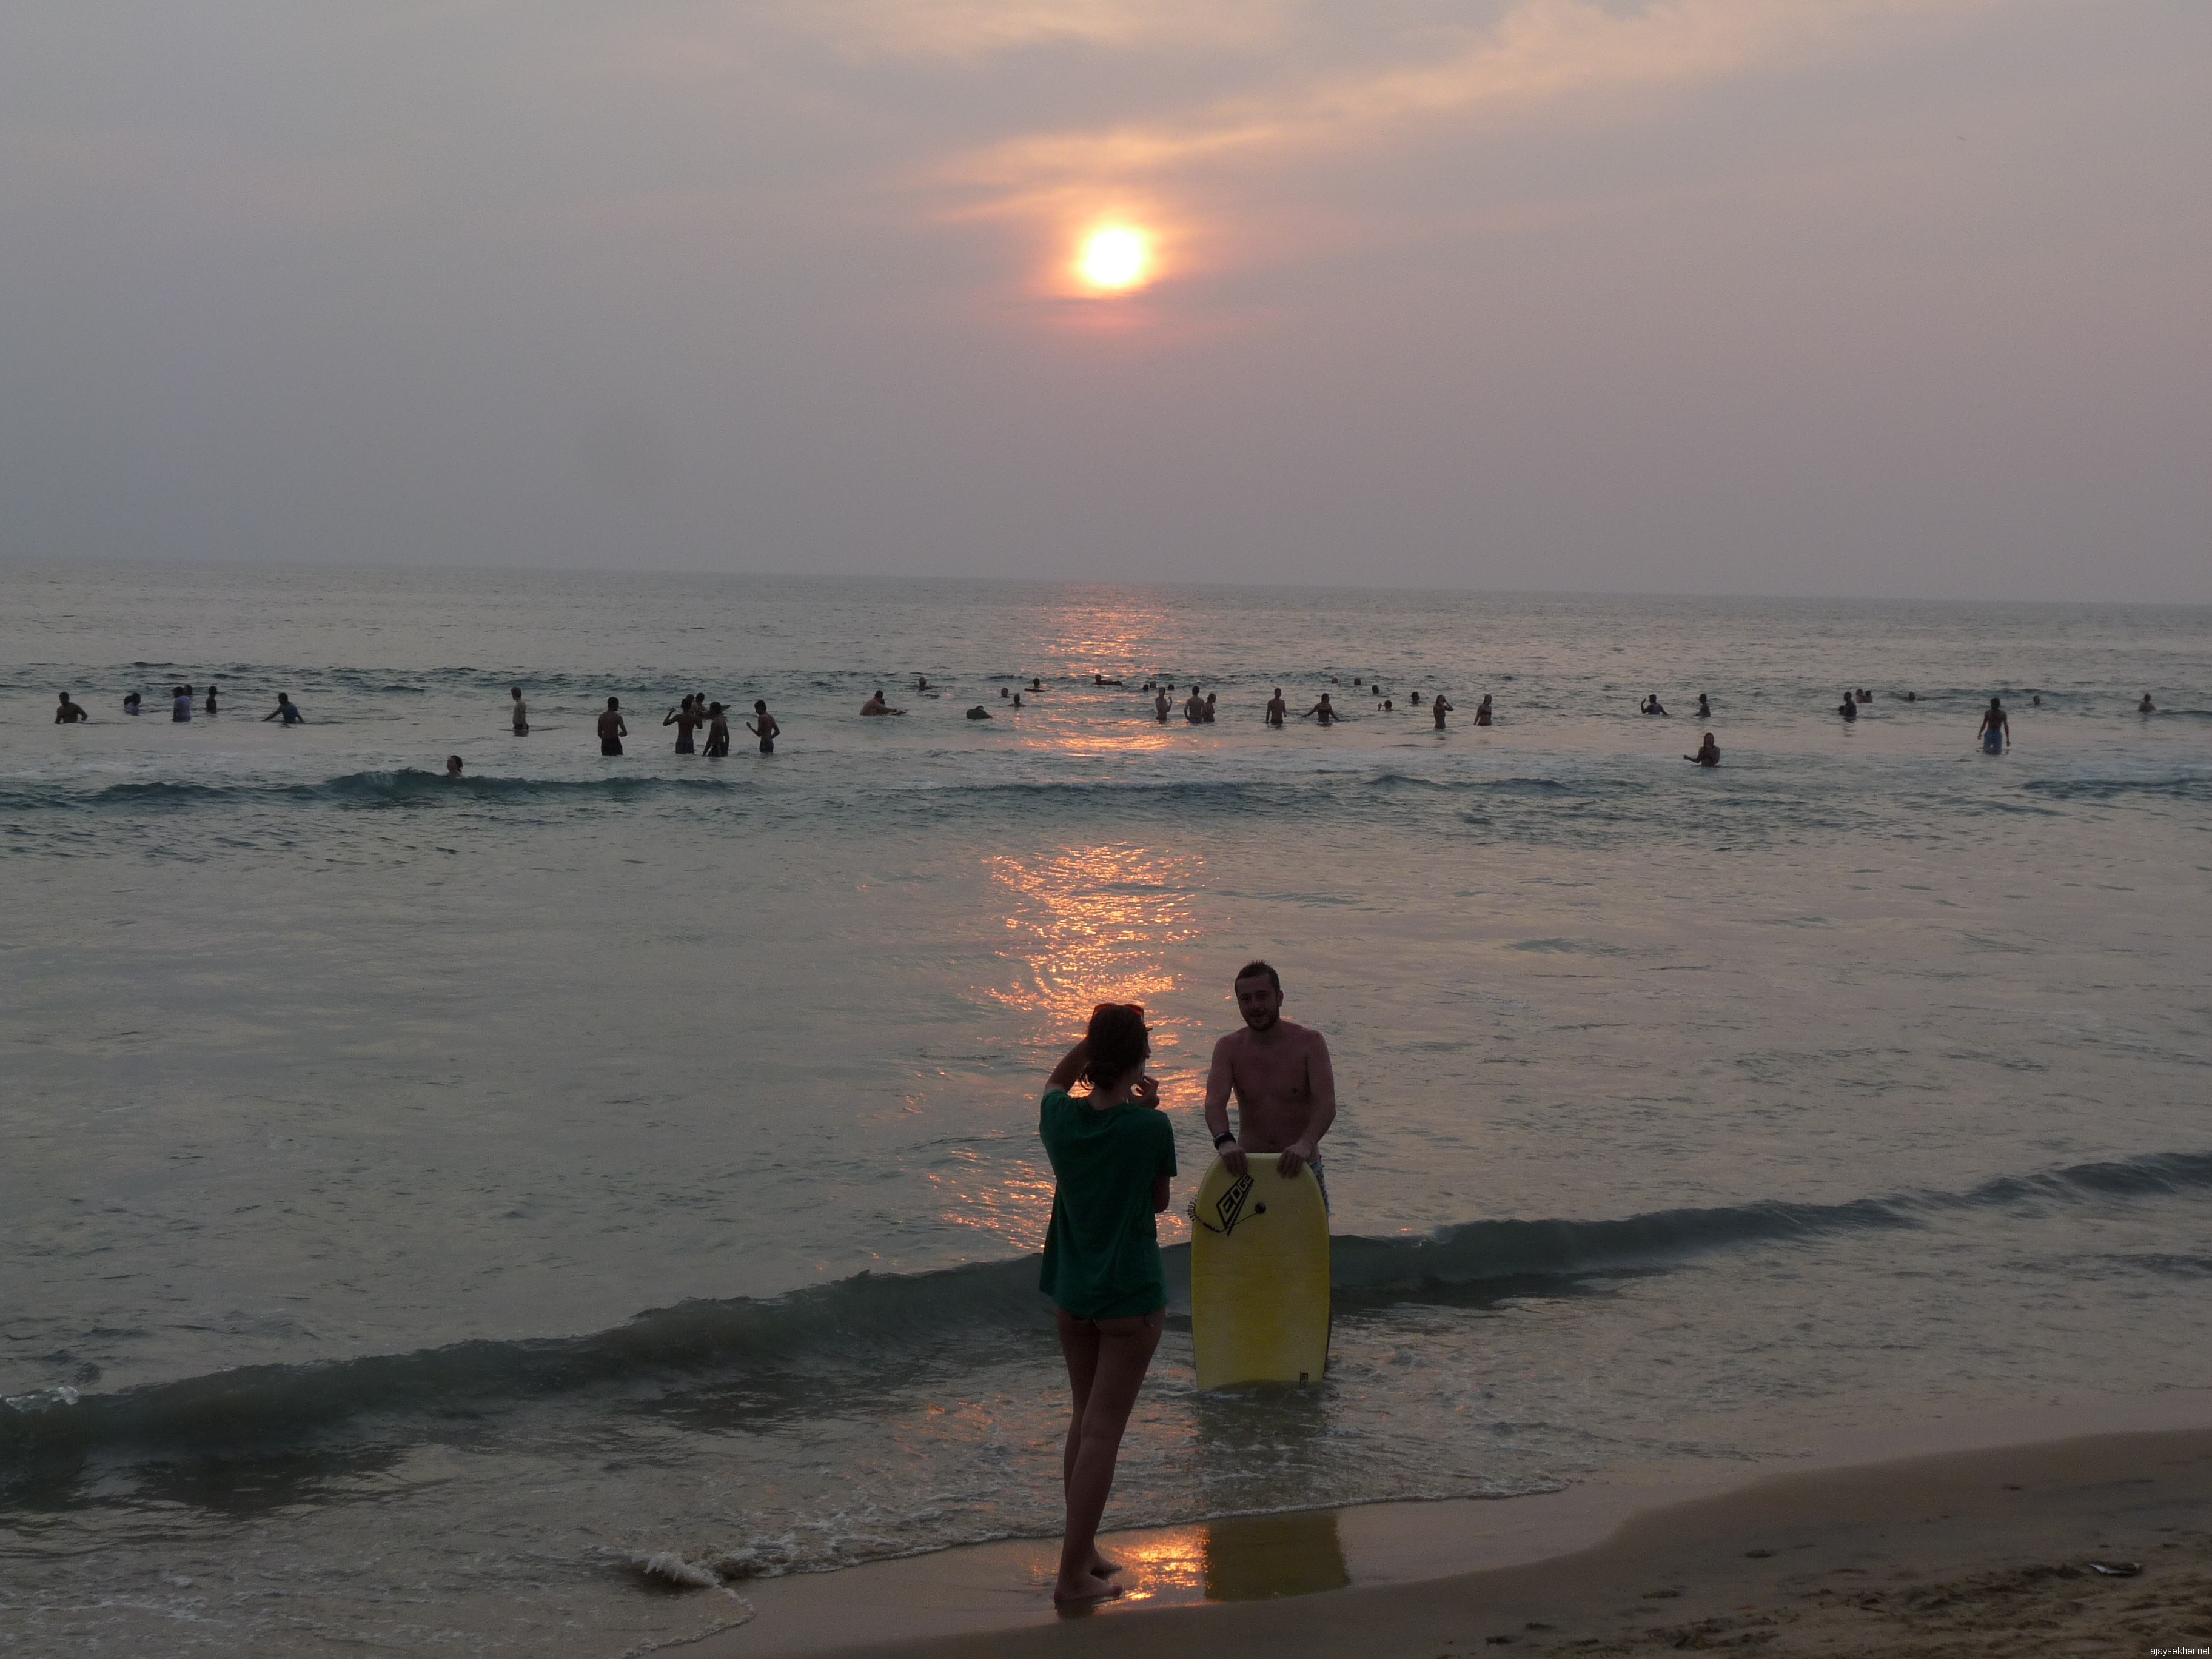 A couple from alien shores: Sunset at Papanasam beach, Varkala.  2012 Christmas comes to an end...